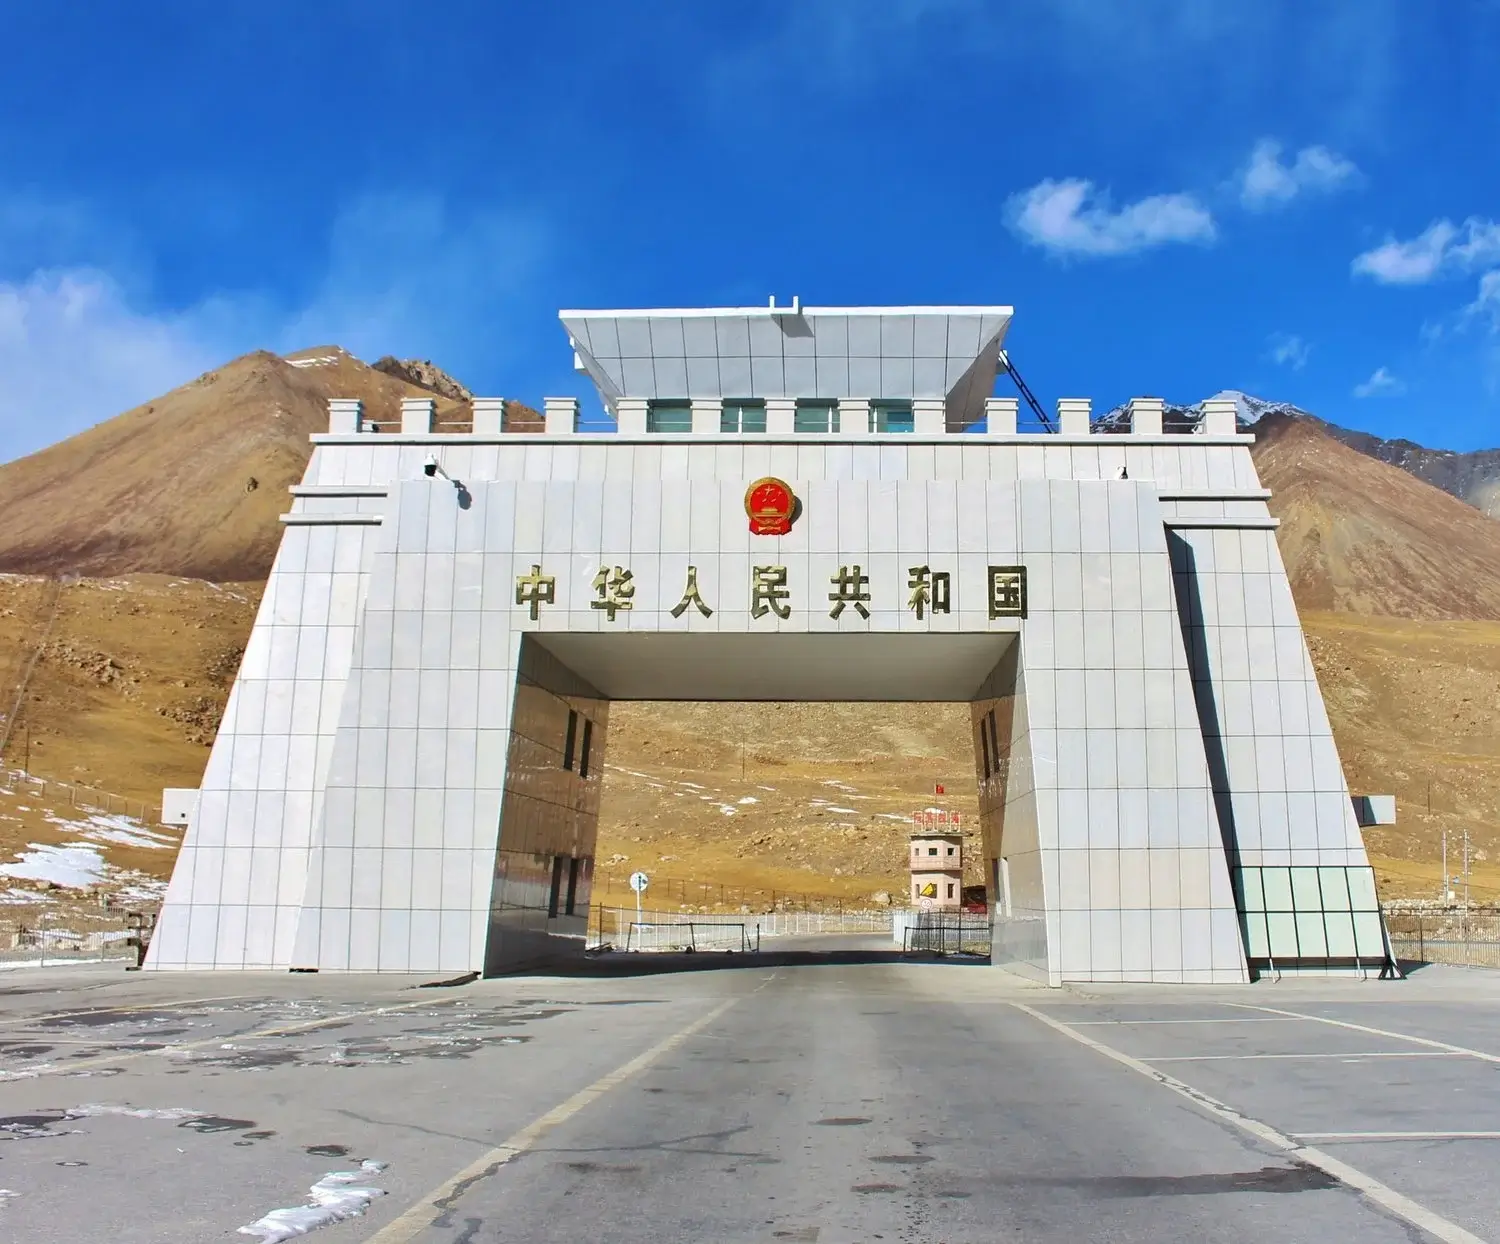 khunjerab-pass-pakistan-china-border-crossing-what-you-need-to-know-dates-transportation-times-bus+(1)